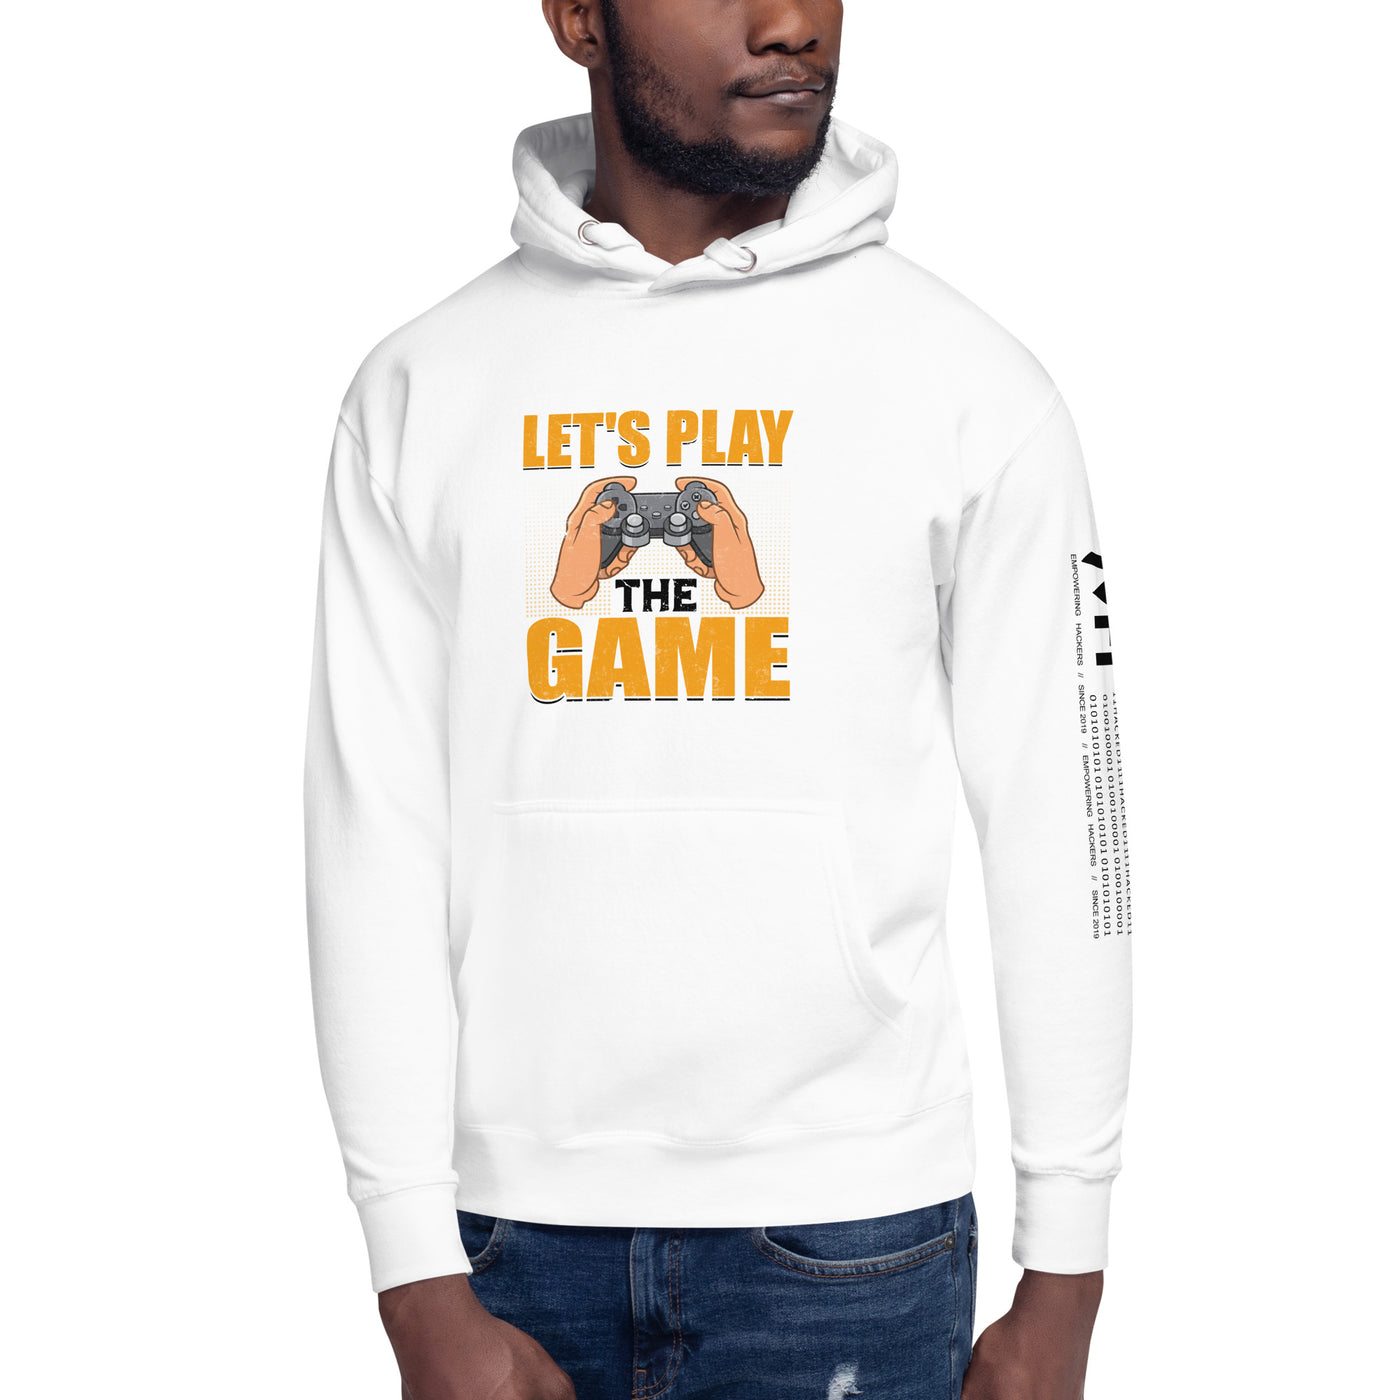 Let's Play the Game in Dark Text - Unisex Hoodie